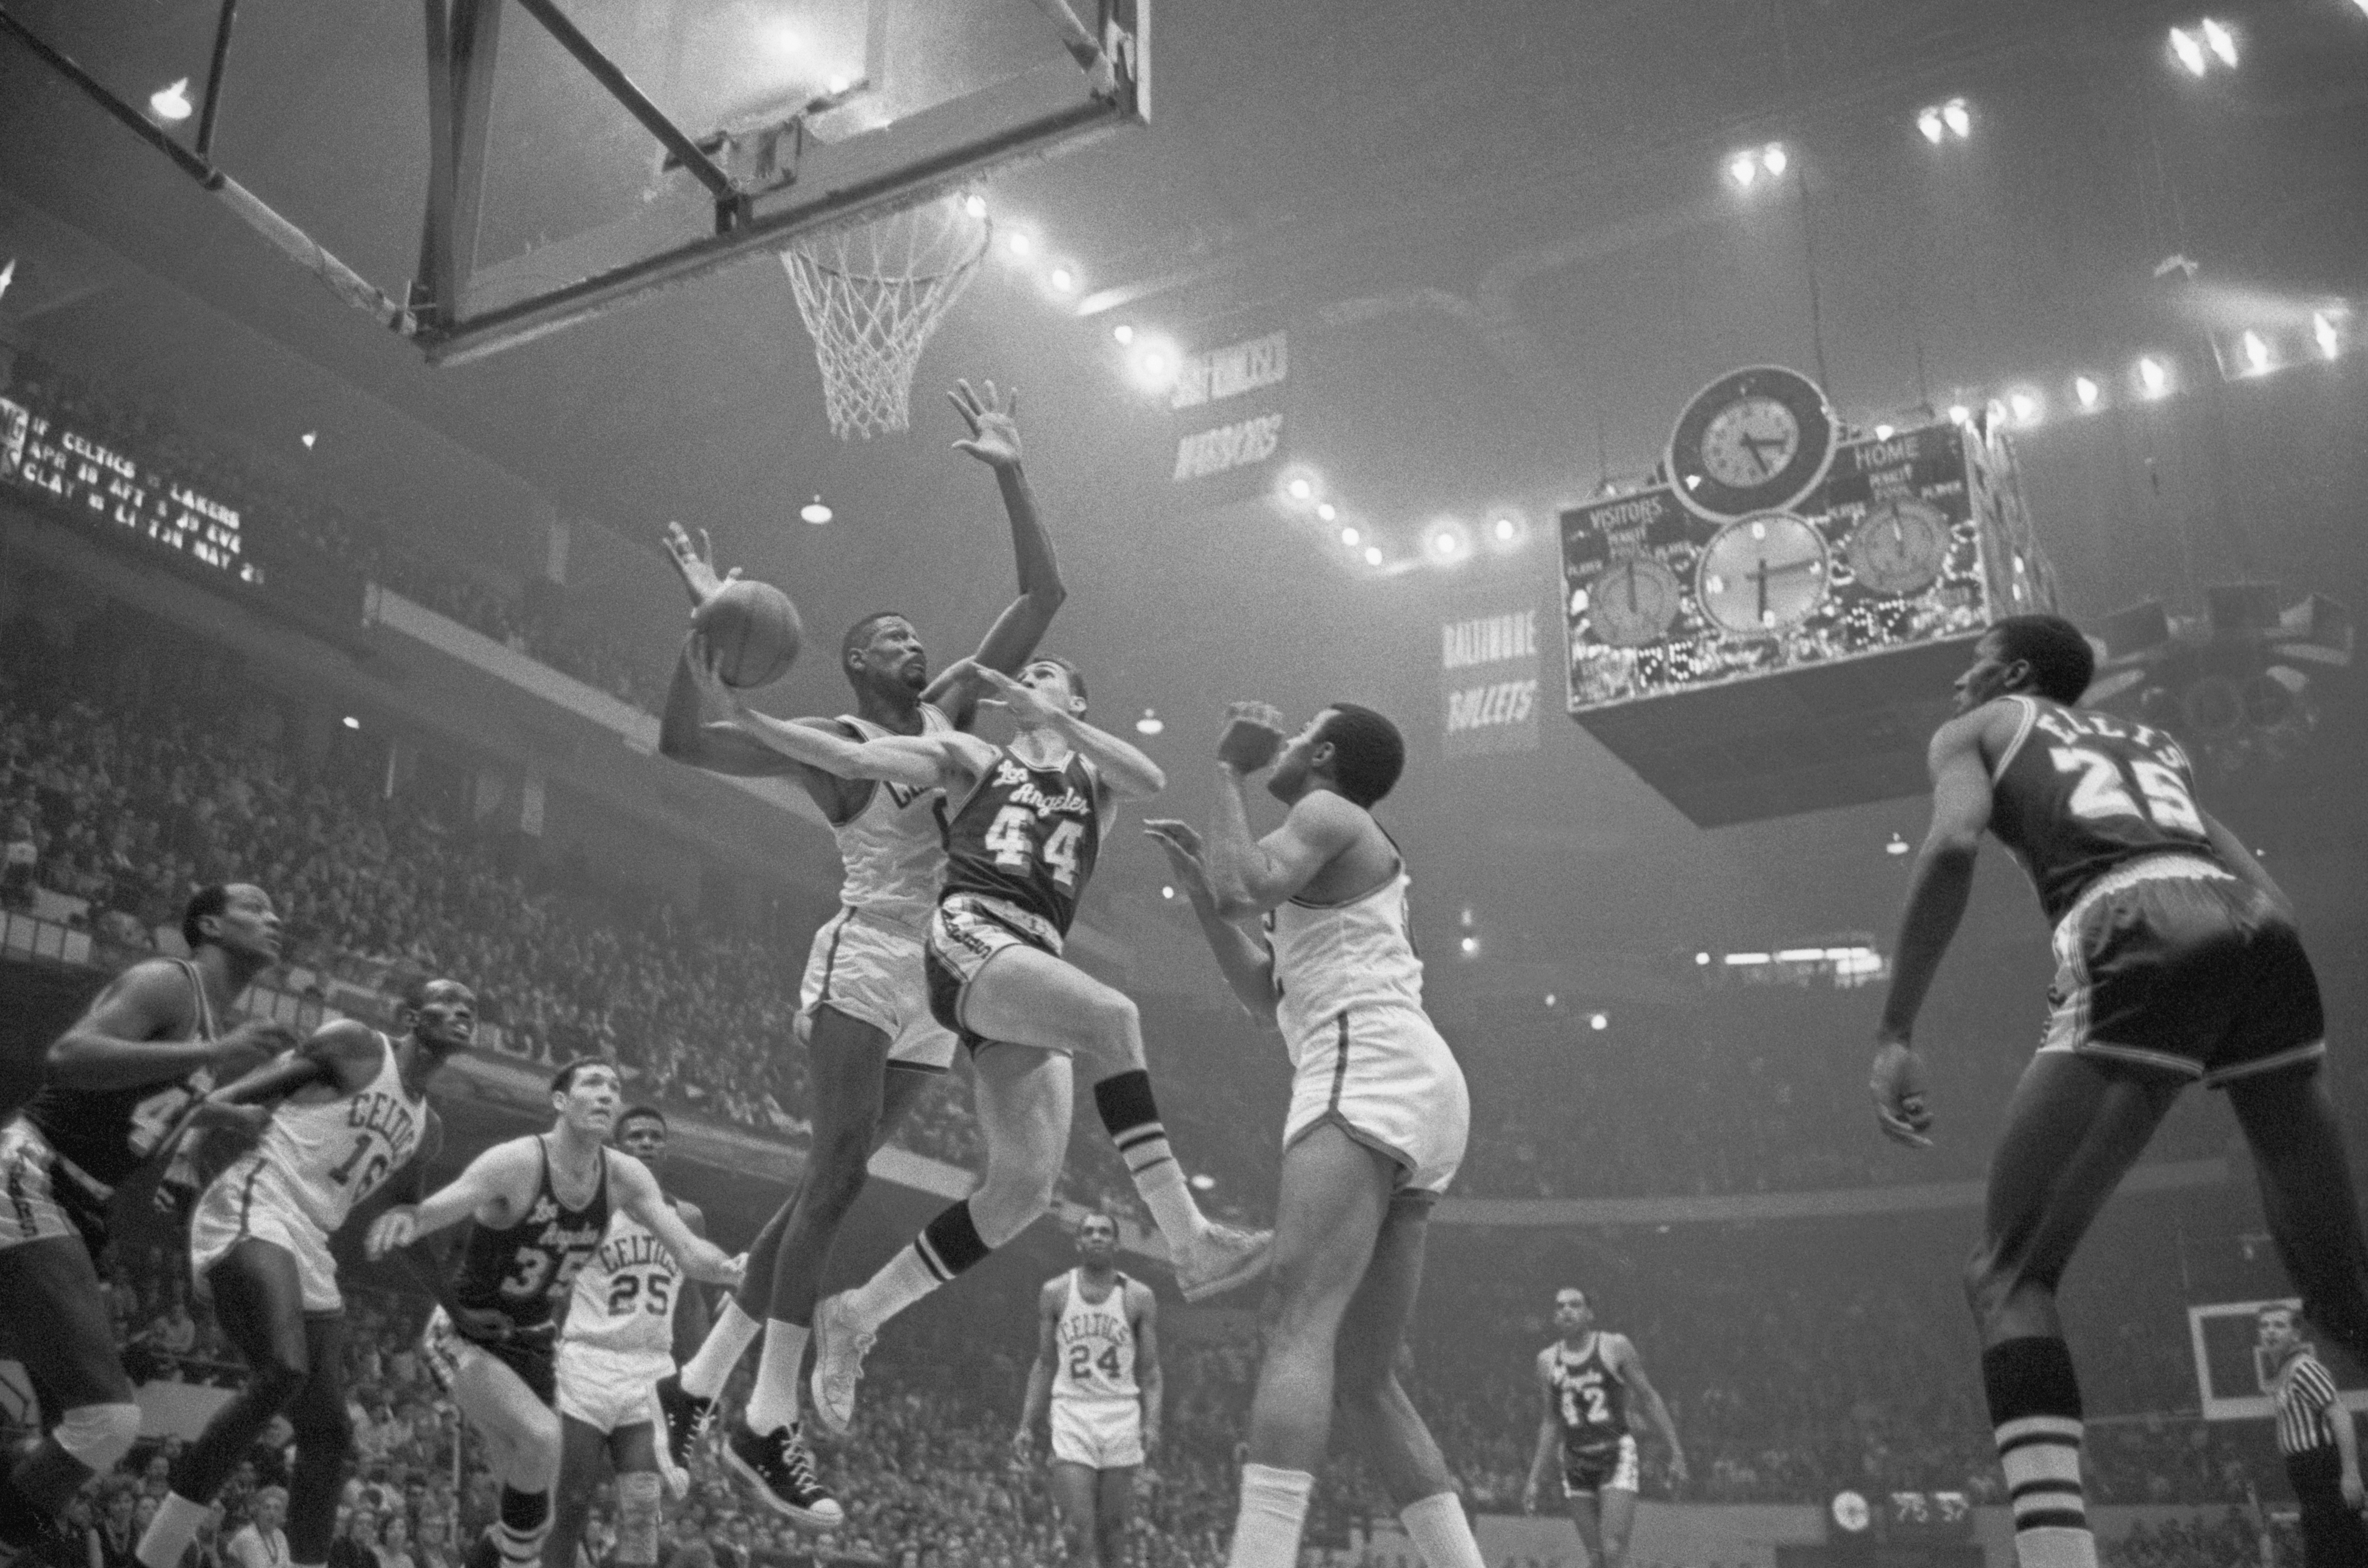 Bill Russell tries to block Jerry West's shot during a game between the Celtics and Lakers